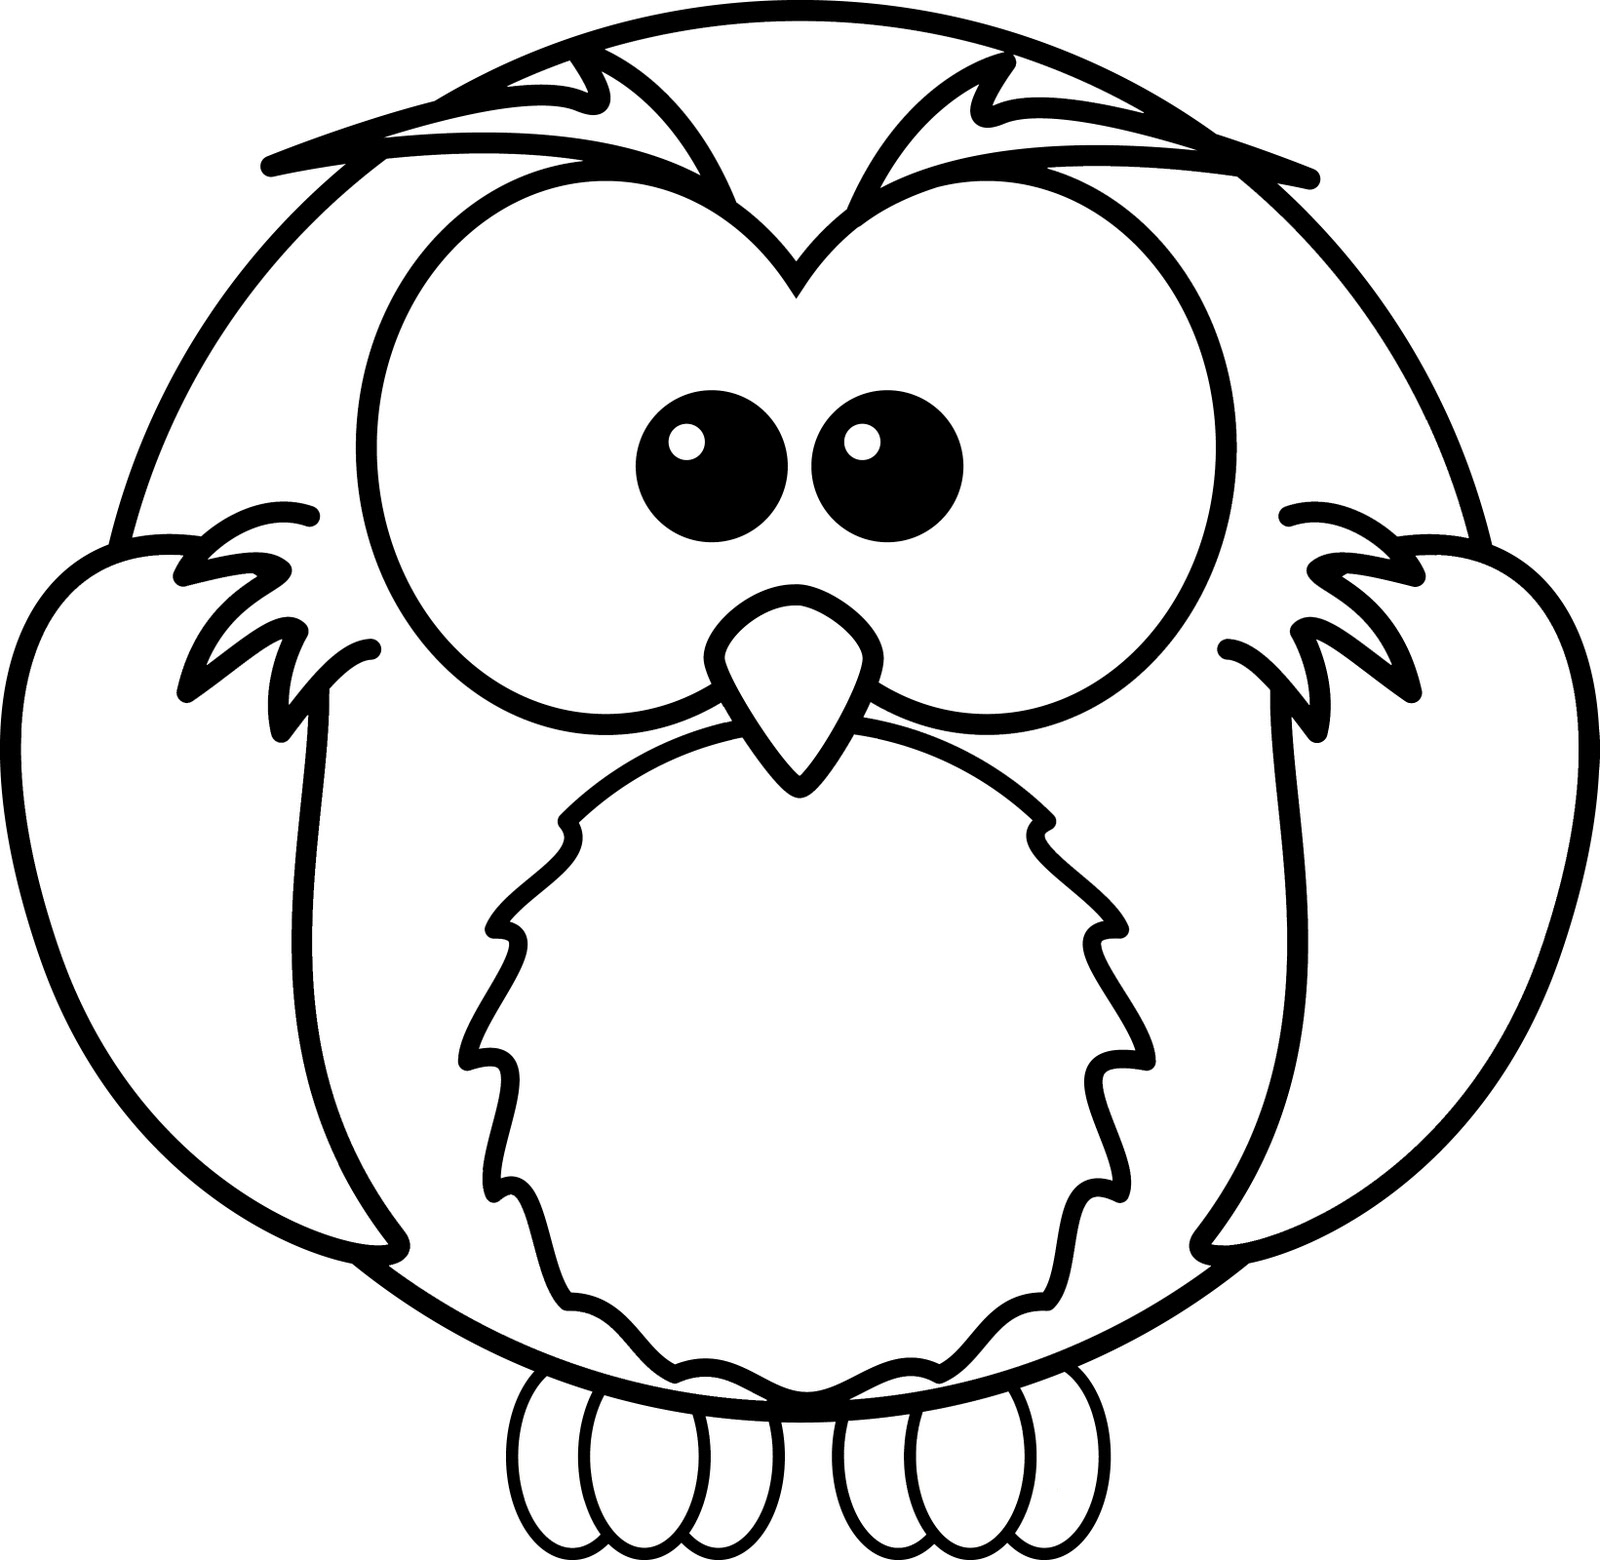 Coloring Pages Of Owl 9